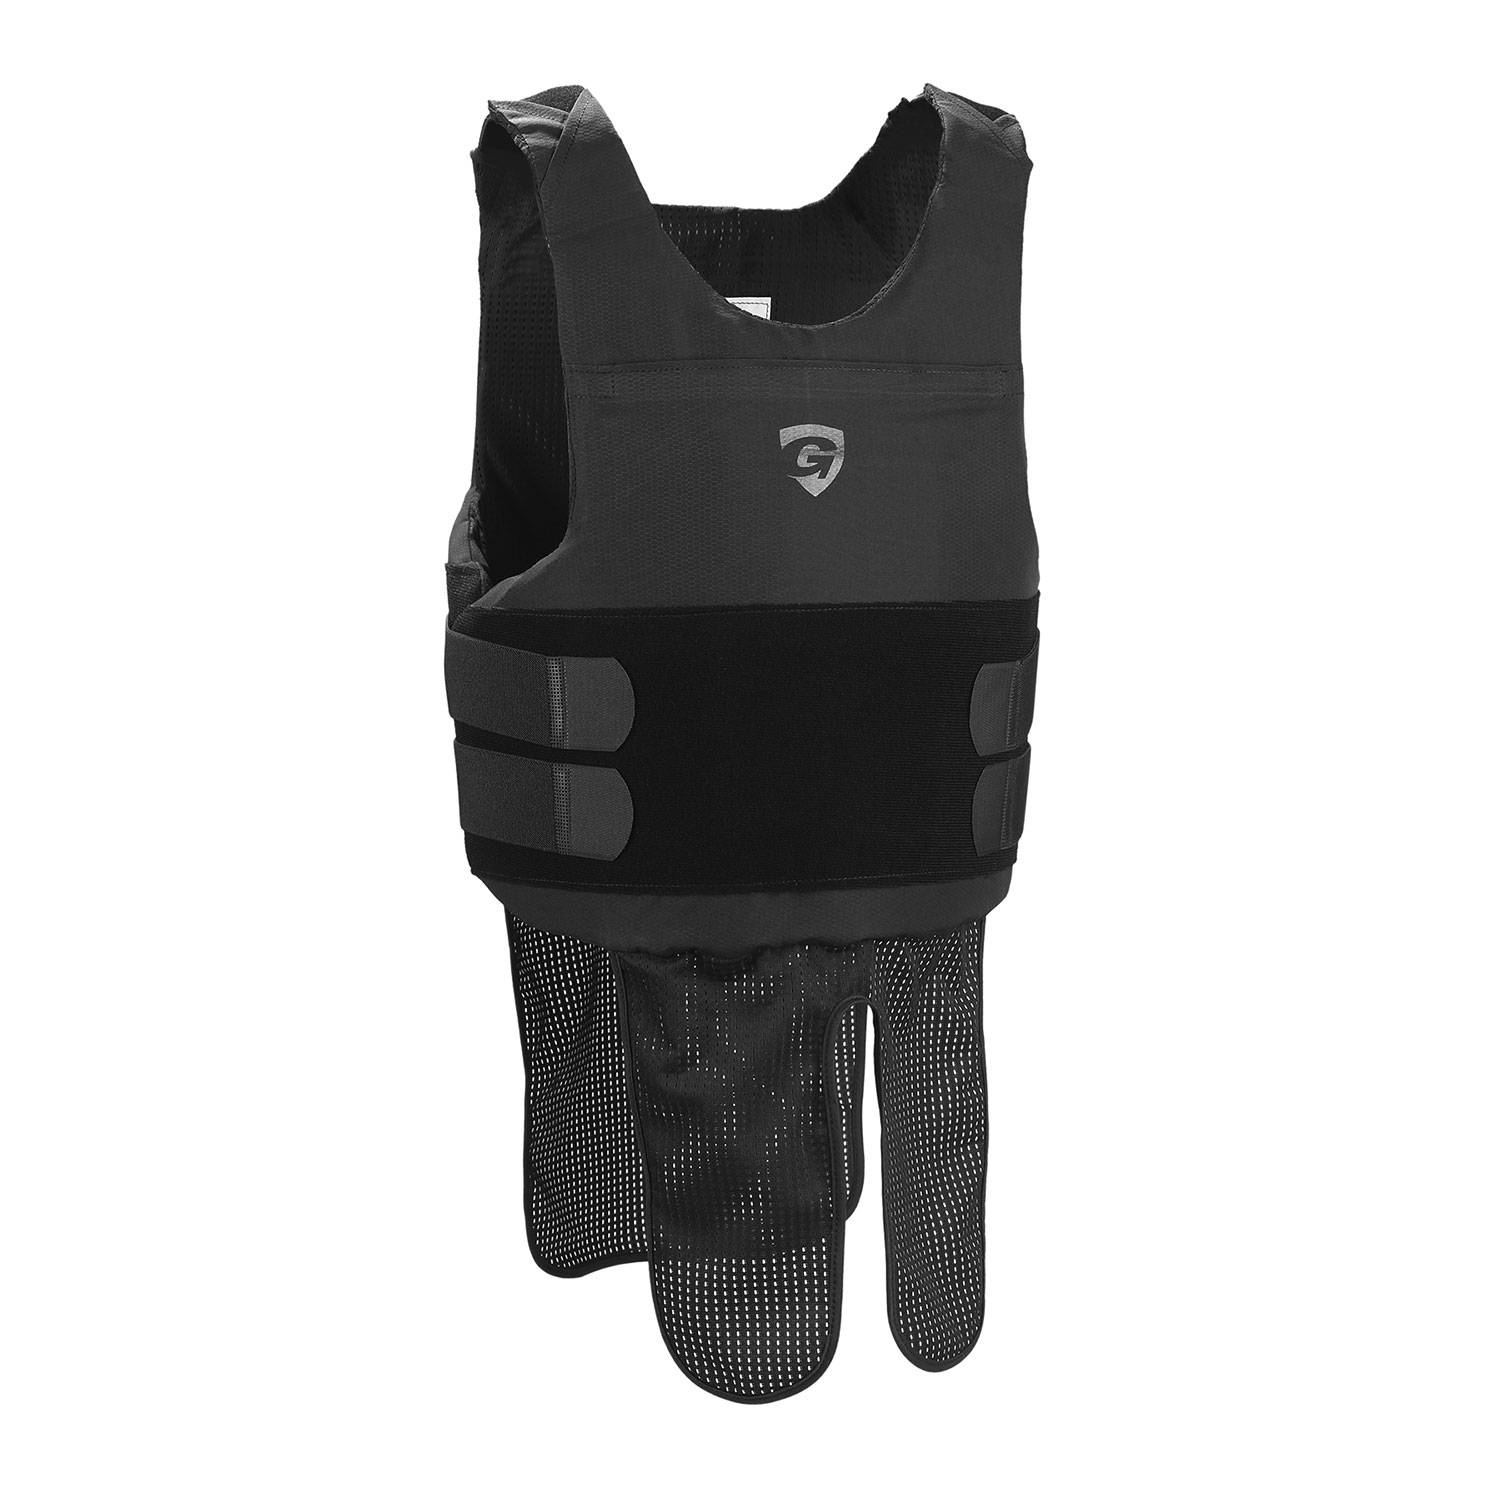 Covert Body Armour Level 2 NIJ Stab Vest with Soft Armour Panels 